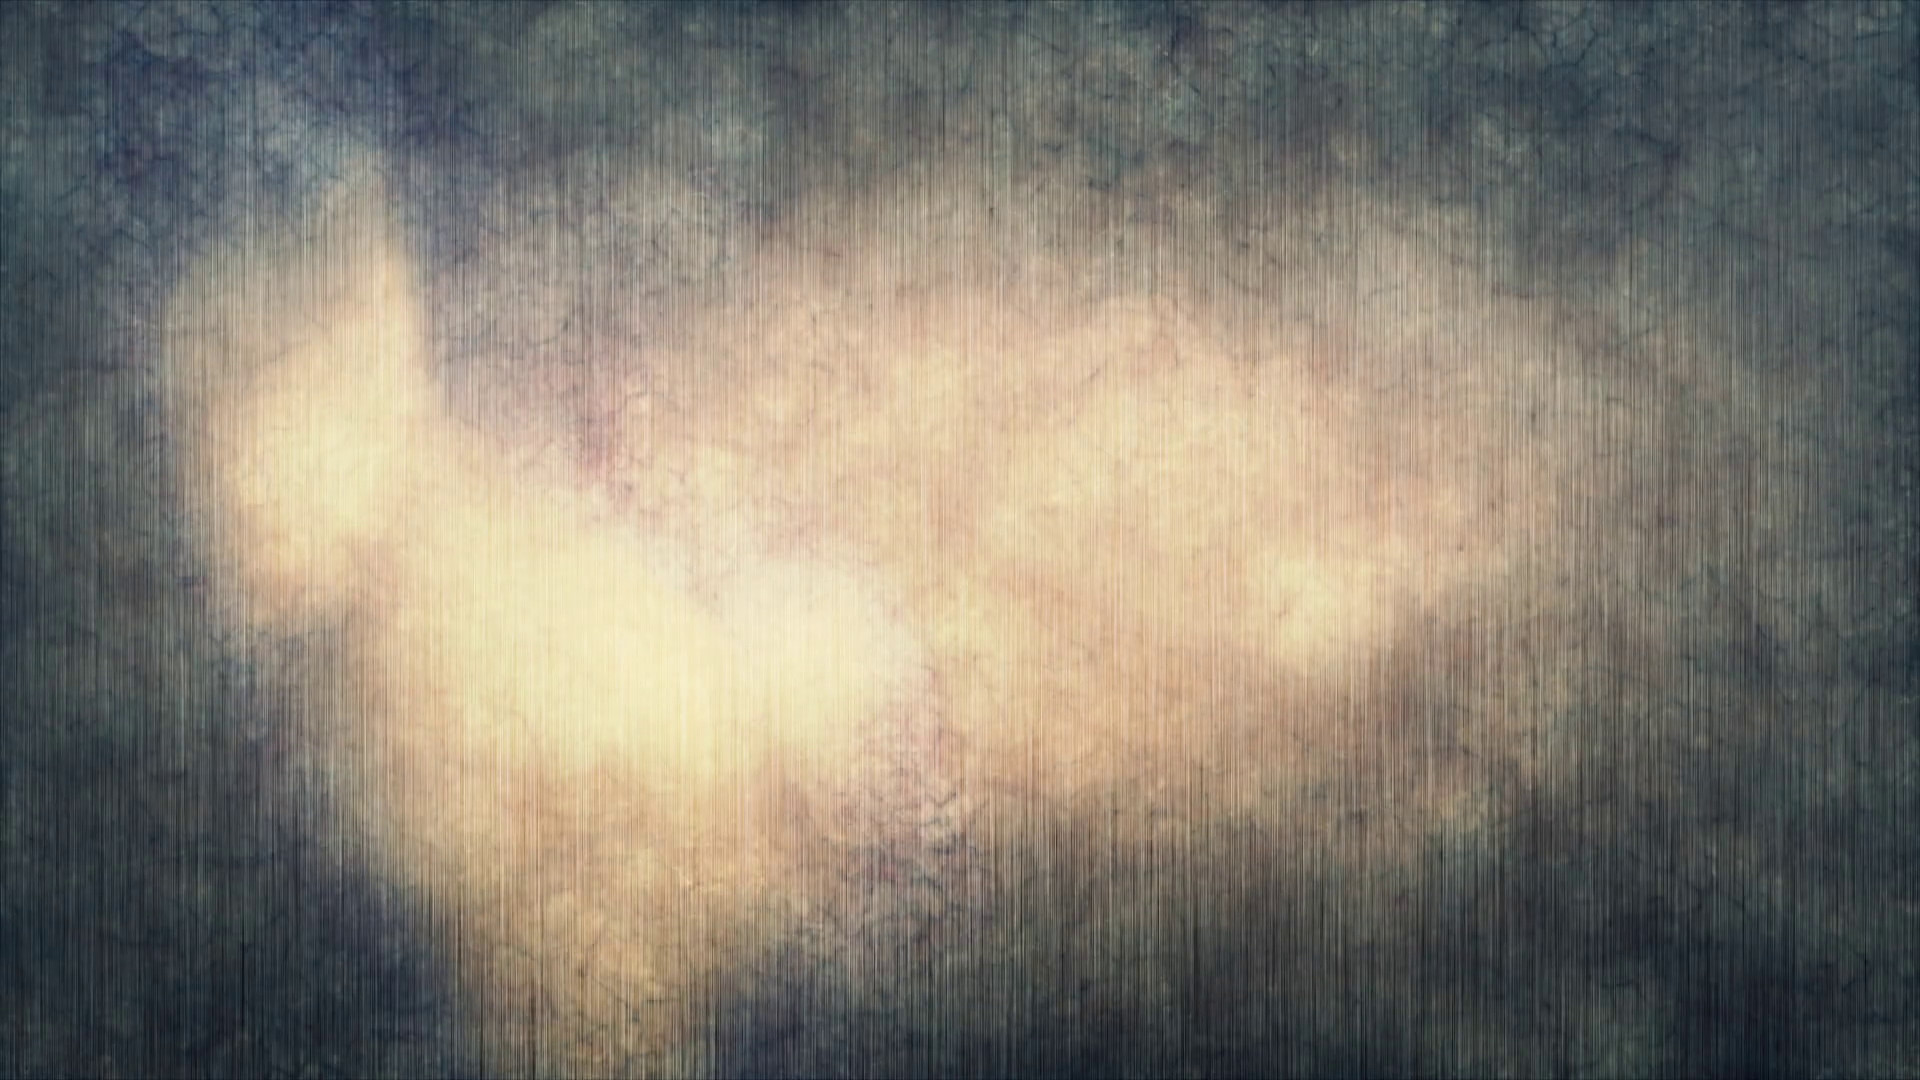 1920x1080 Grunge abstract textured background animation stock footage. An abstract  surreal grungy background with soft lighting shining on the surface.